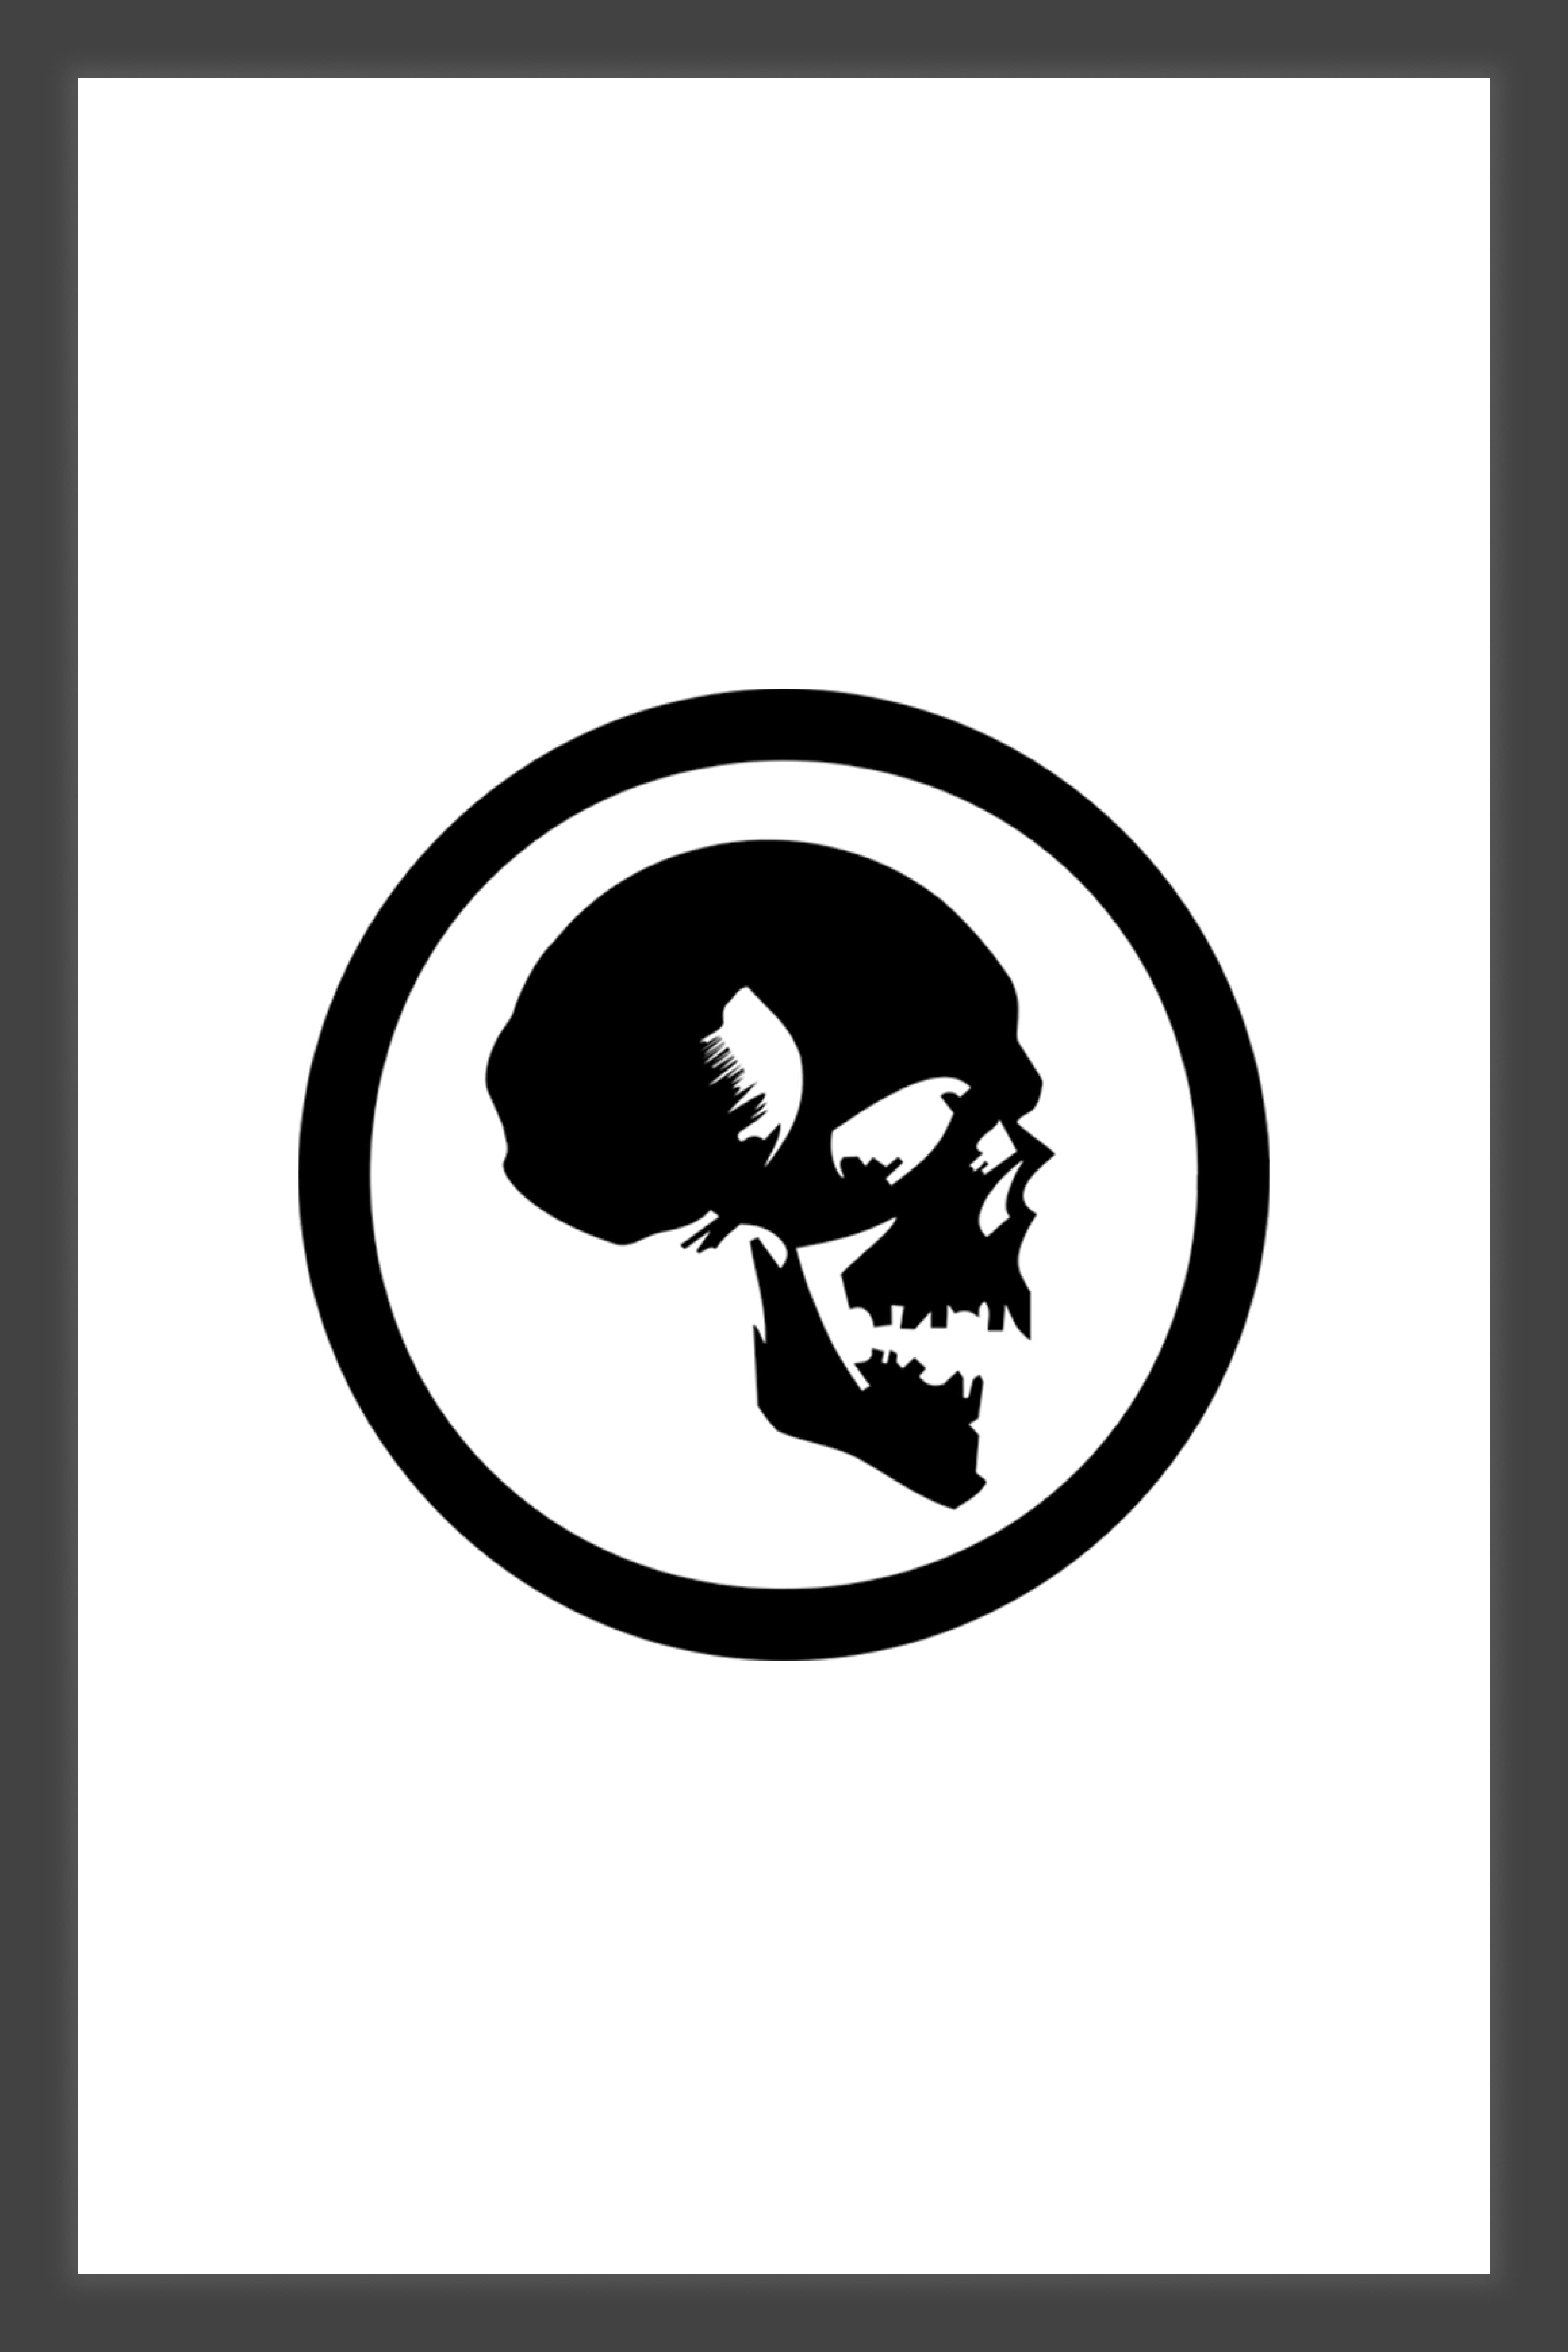 Image of a Skull in profile in a black circle.